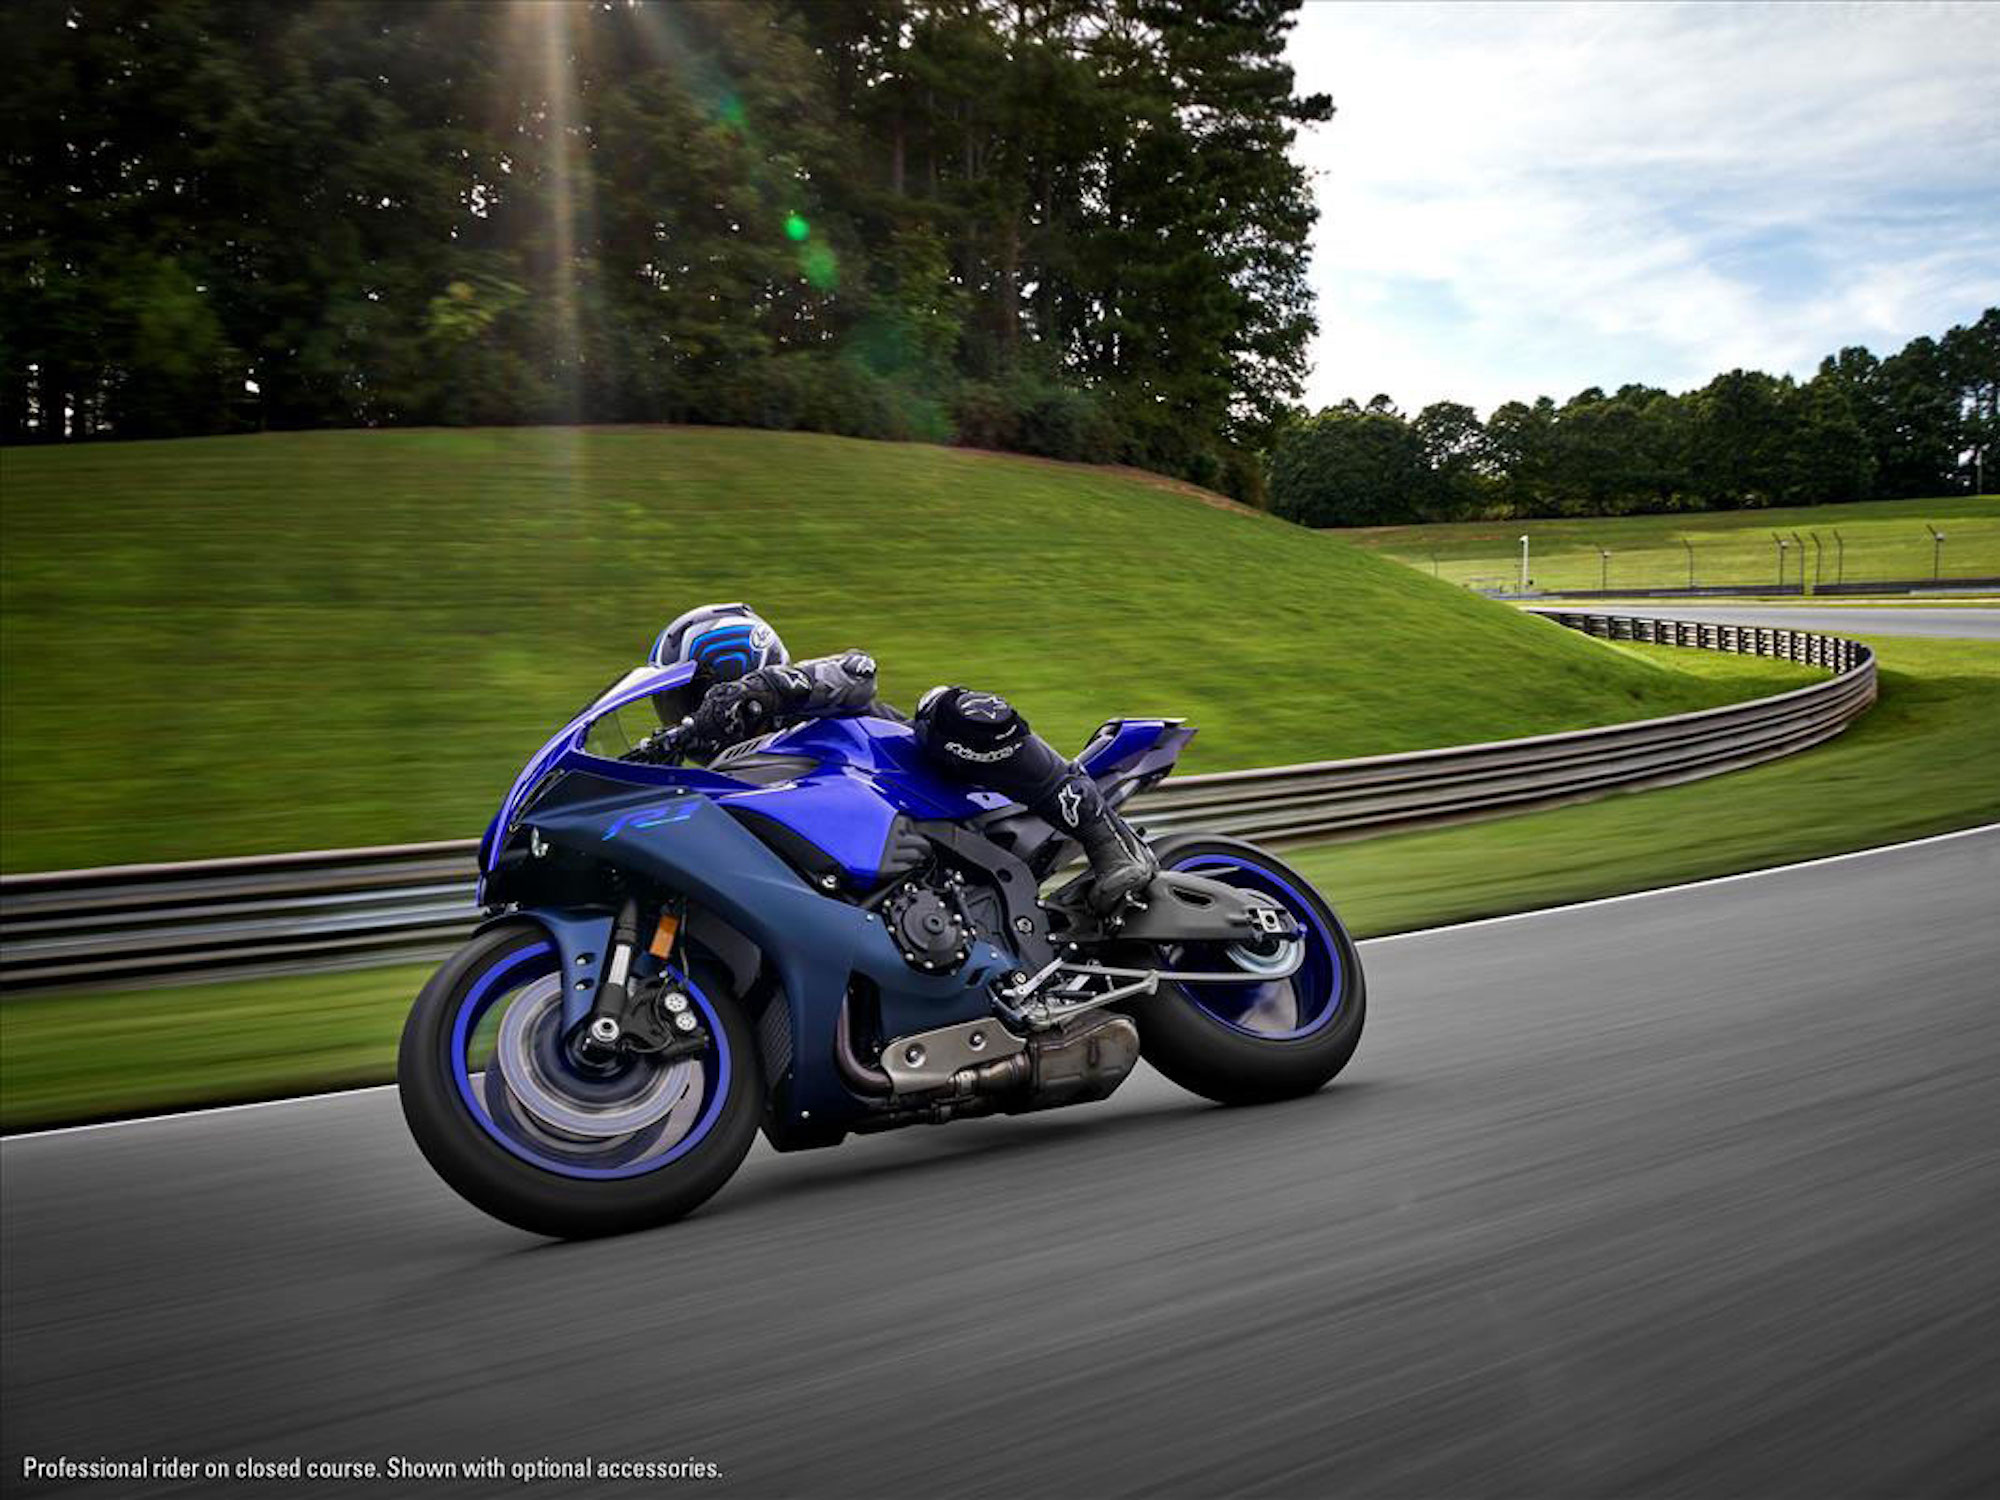 A view of Yamaha's R1. Media sourced from Xtreme Honda.